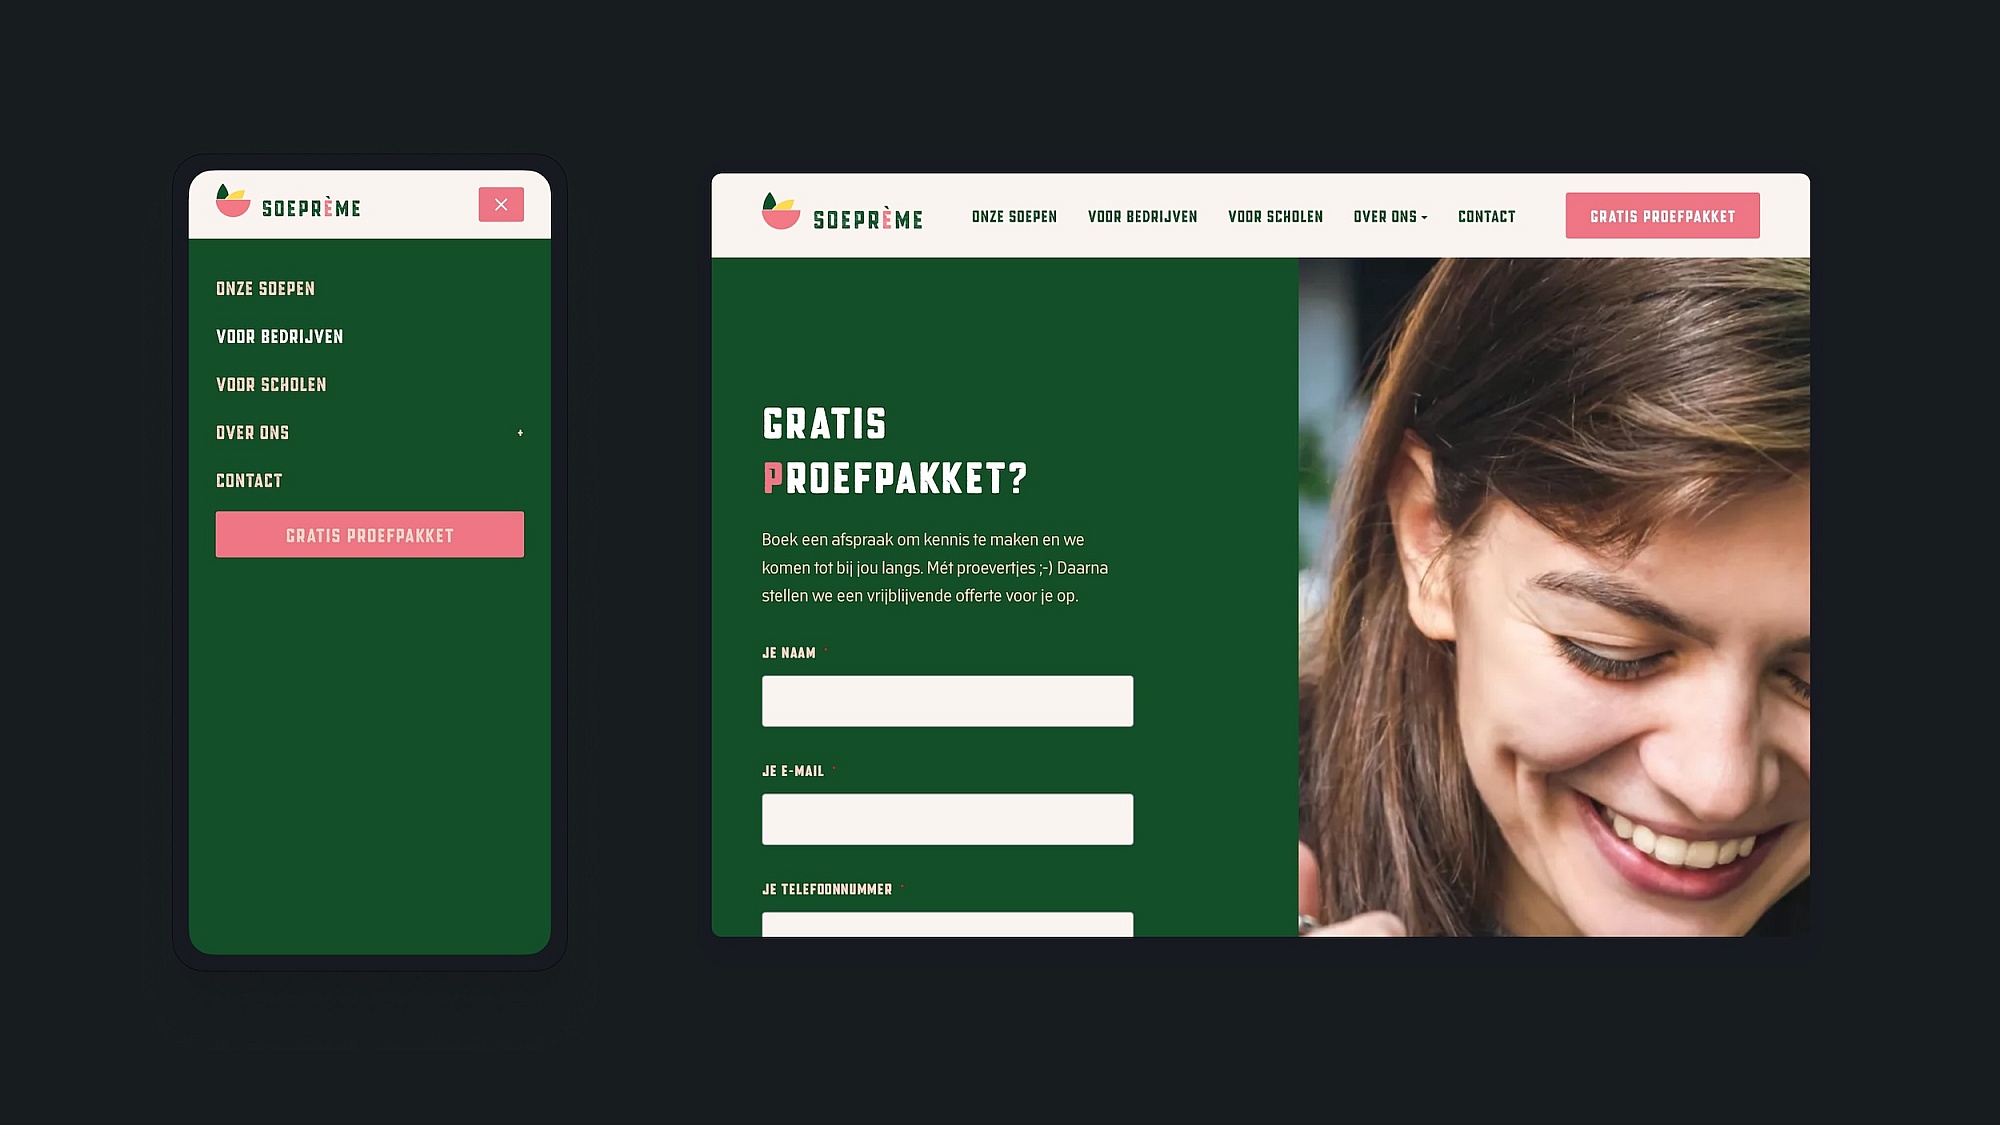 Screenshots of (details of) the website that Soeprème had made by Heave Webdesign Antwerp